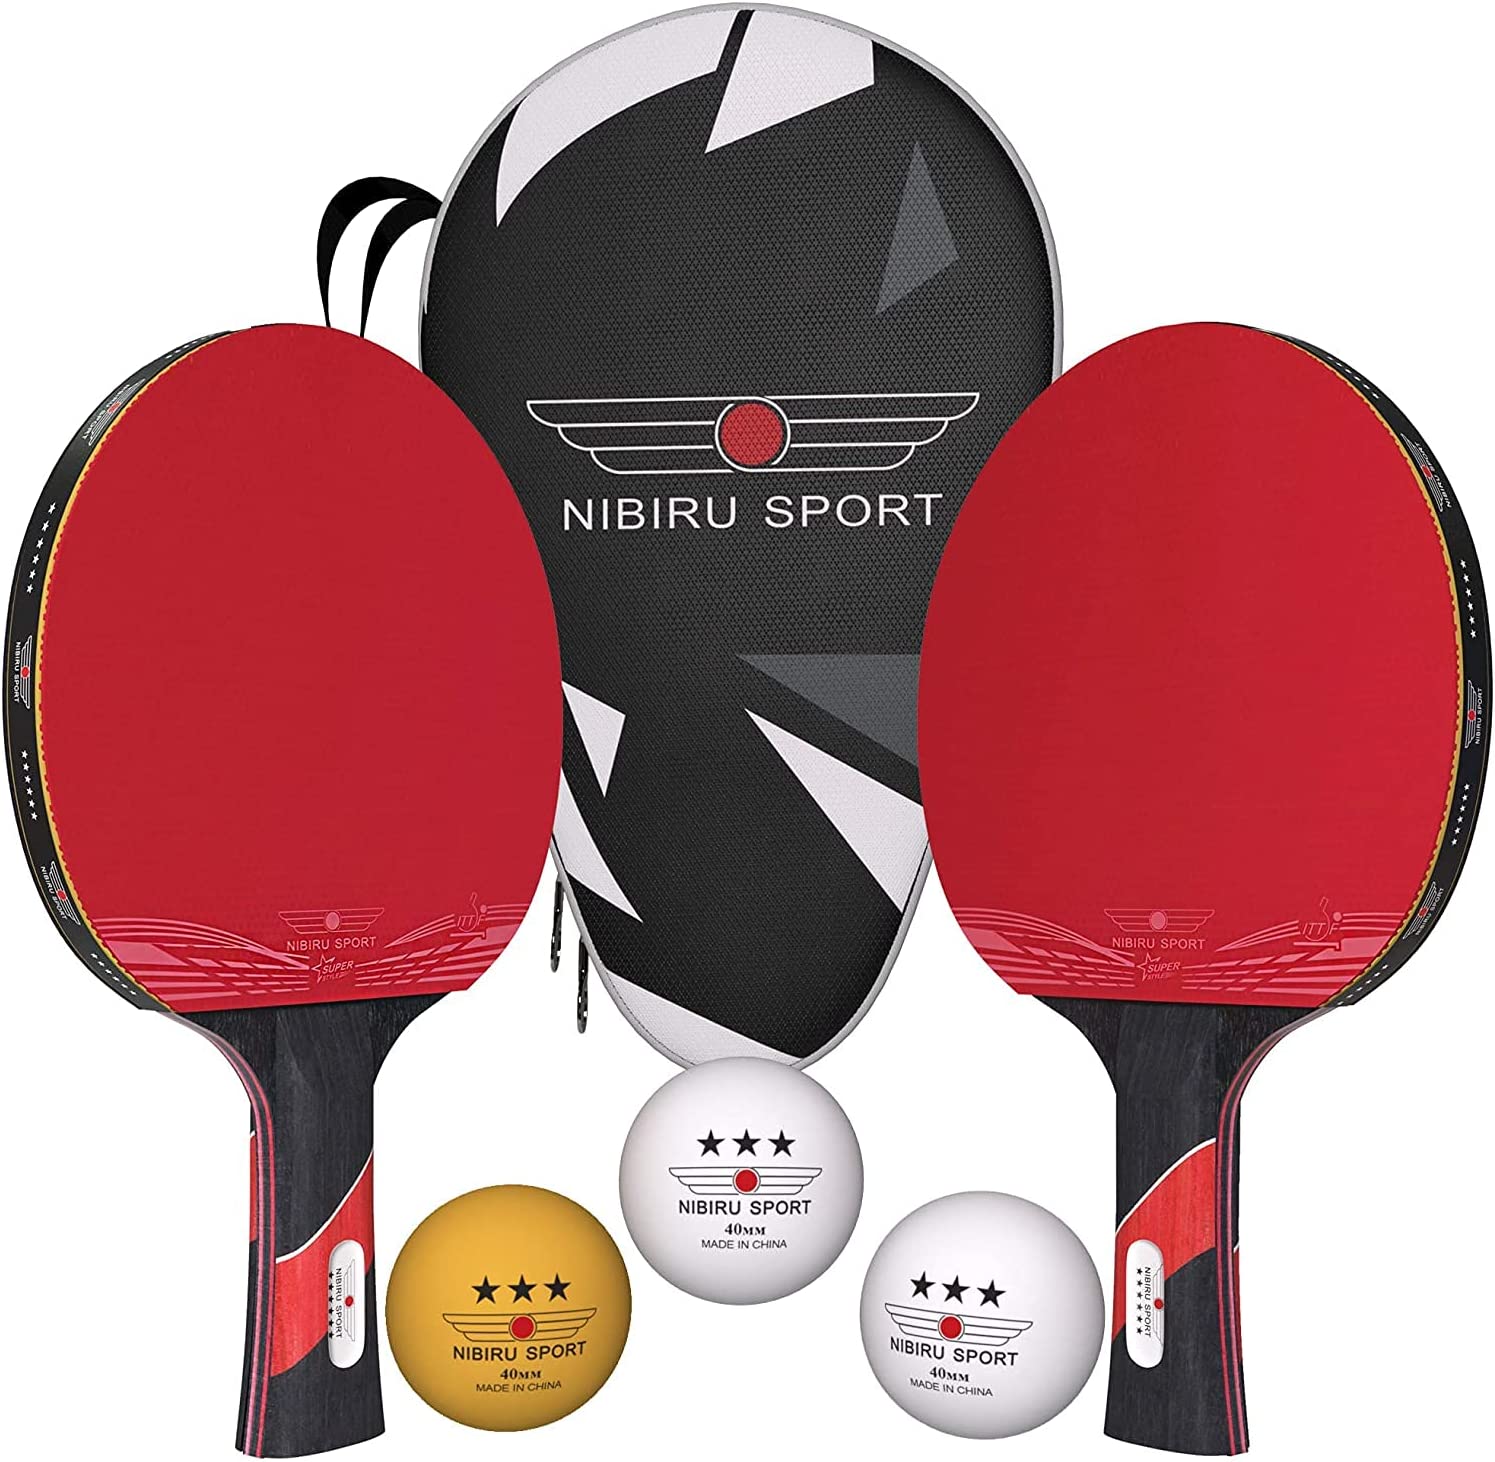 Dr Ping Pong Wooden Table Tennis Racket and 2 Ping Pong Balls 2x Sets Available 